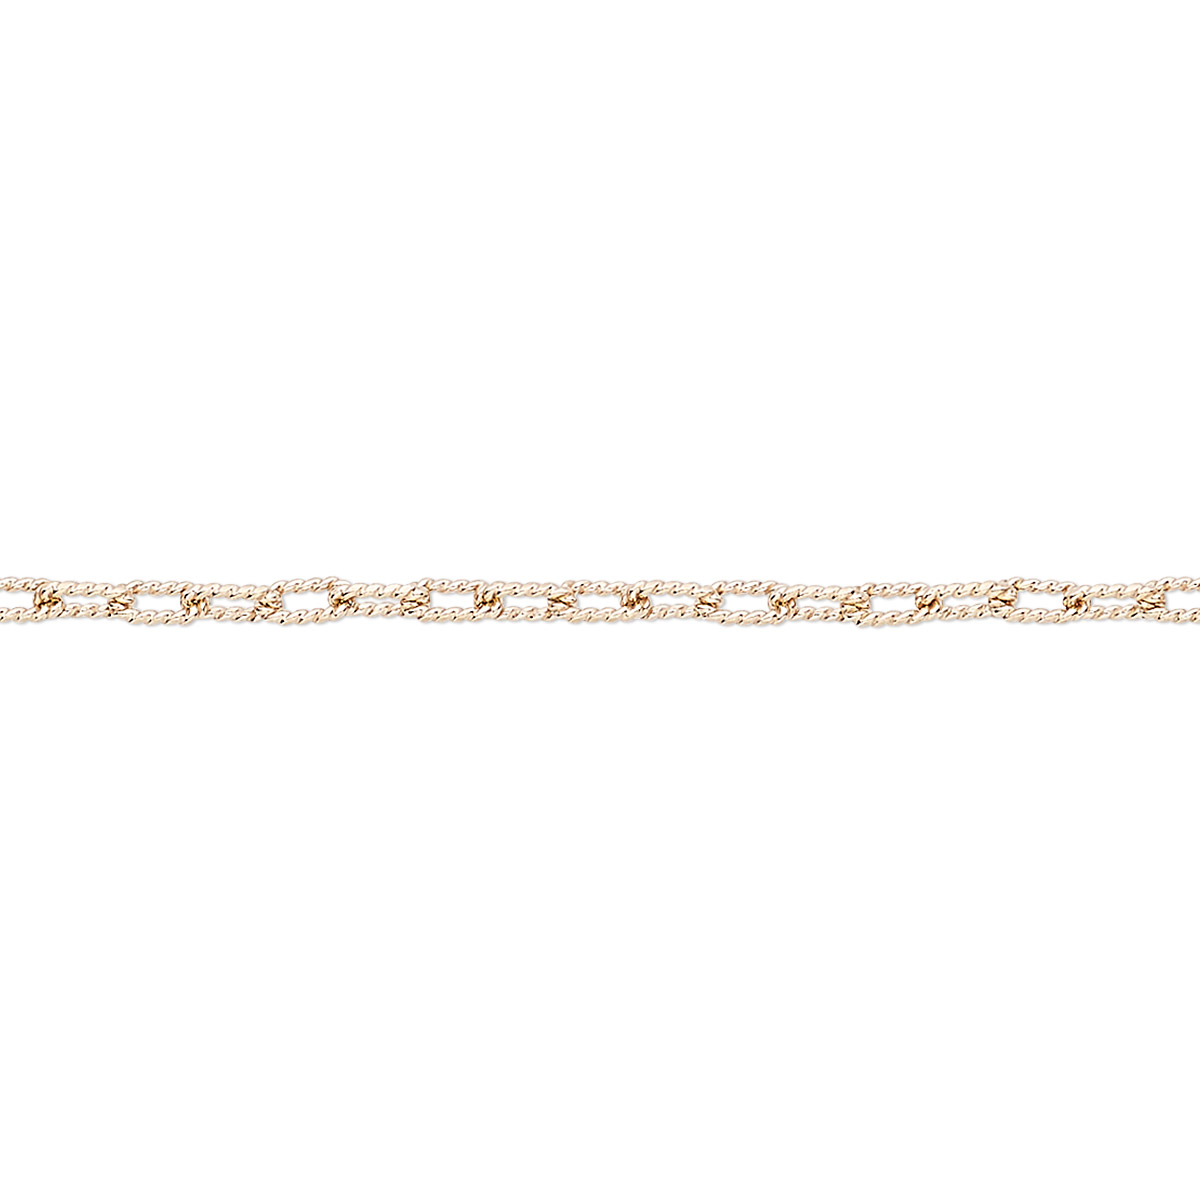 Chain, rose gold-finished sterling silver, 4.5x2mm textured oval cable ...